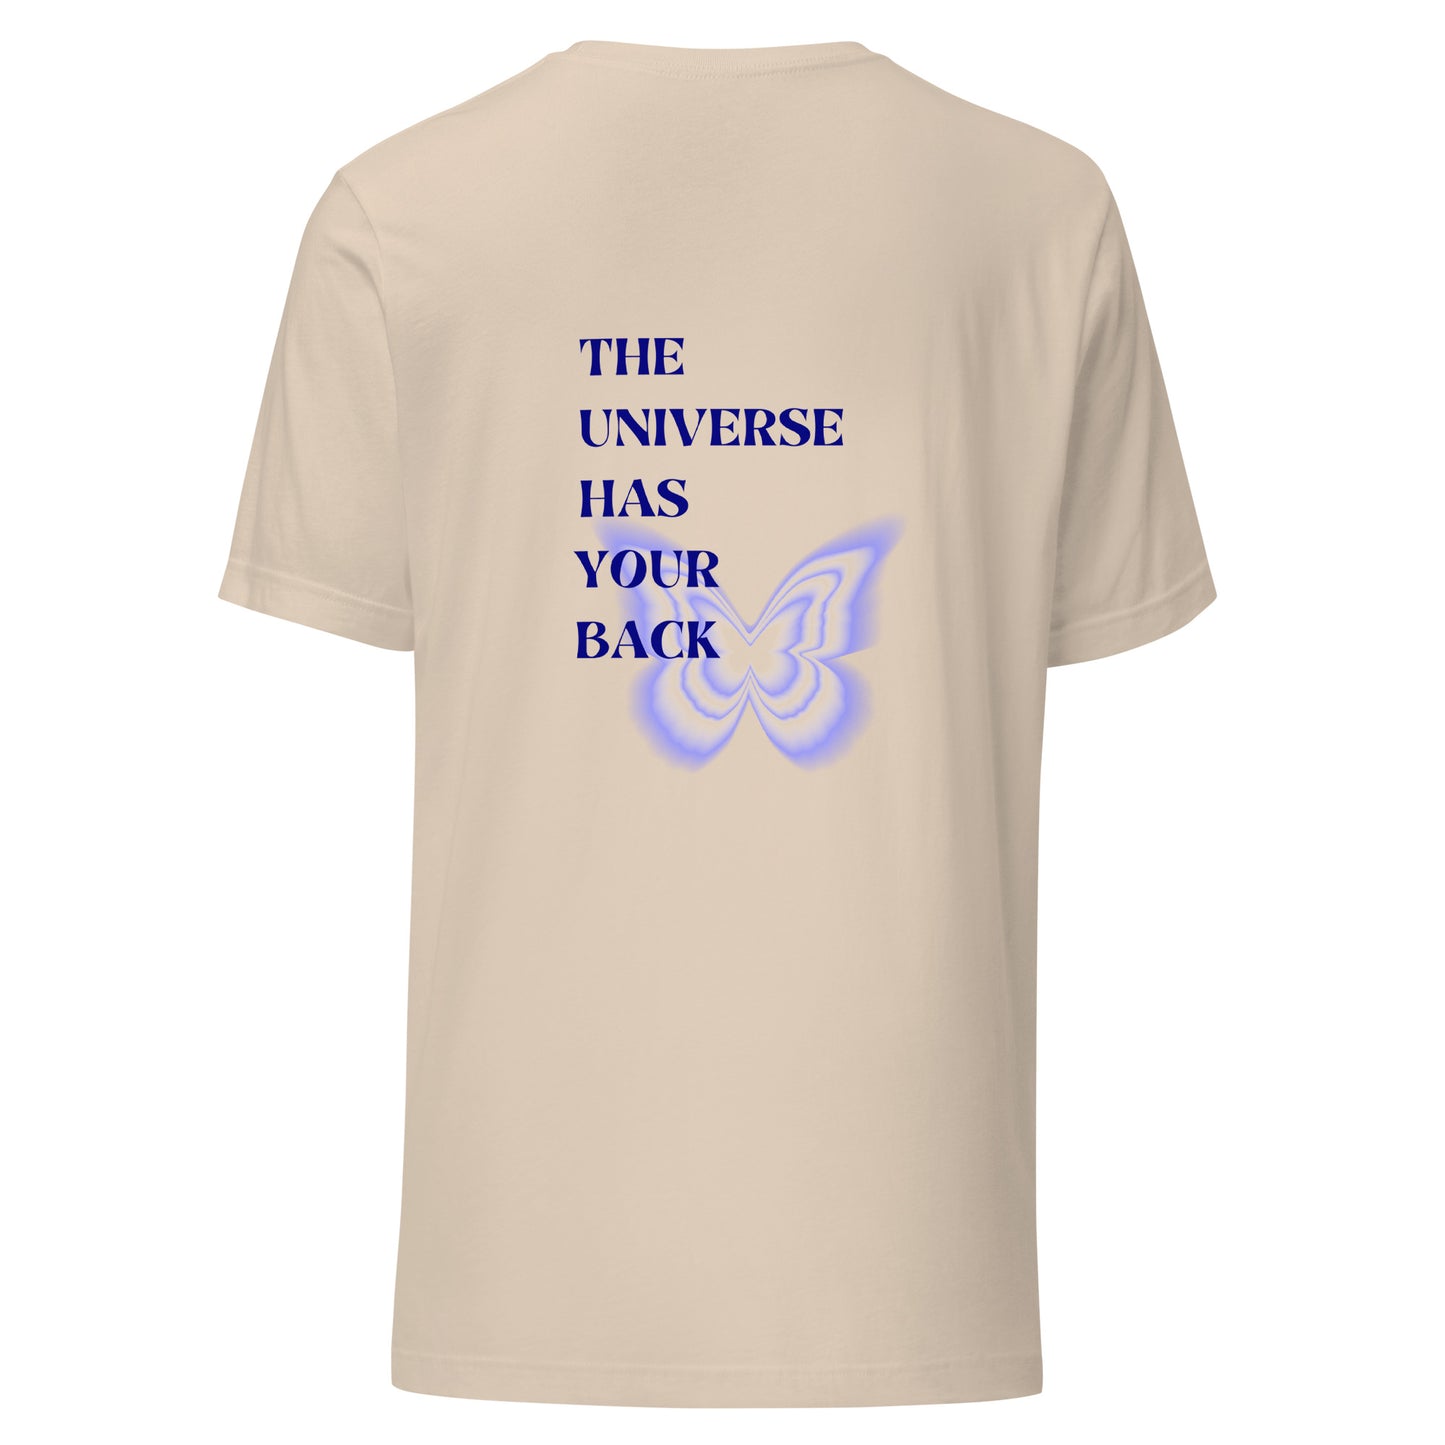 The Universe has your Back - Unisex t-shirt